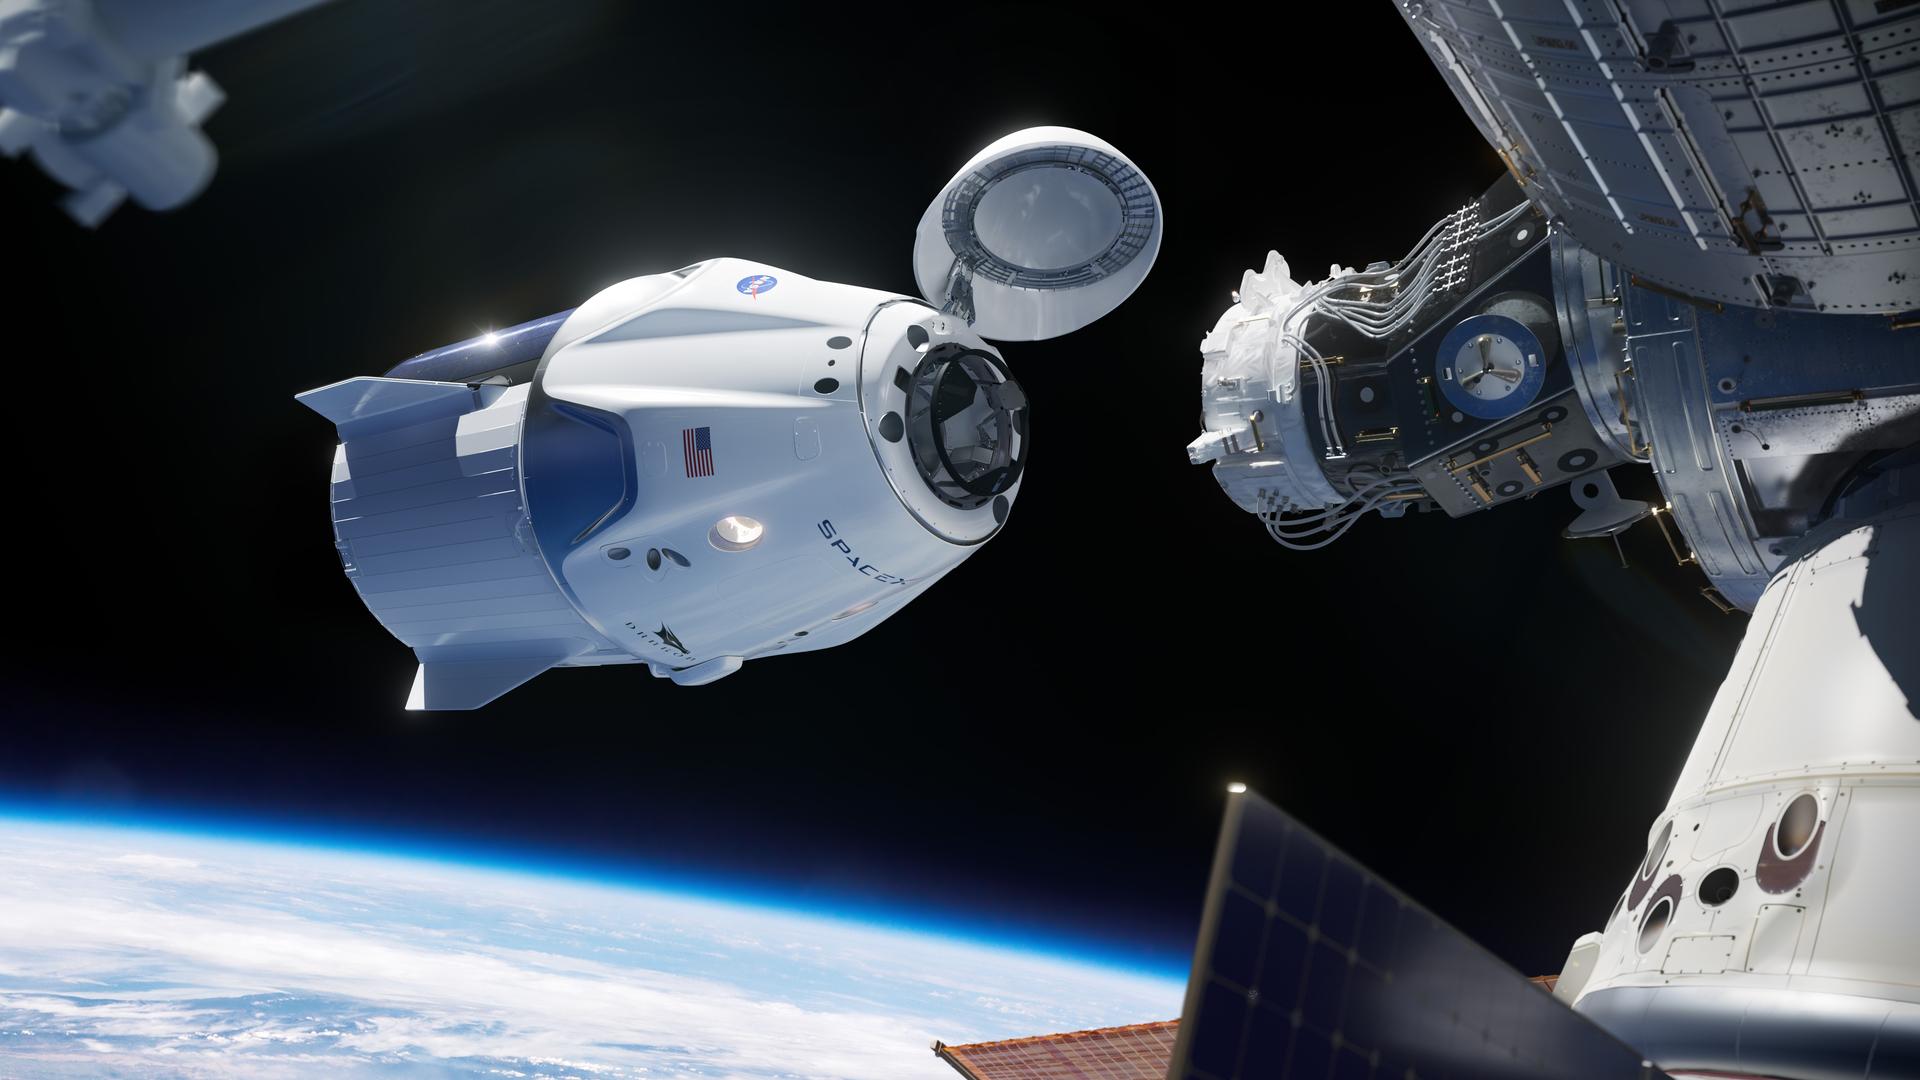 SpaceX and NASA targeting August 1 for Crew Dragon return trip with astronauts on board